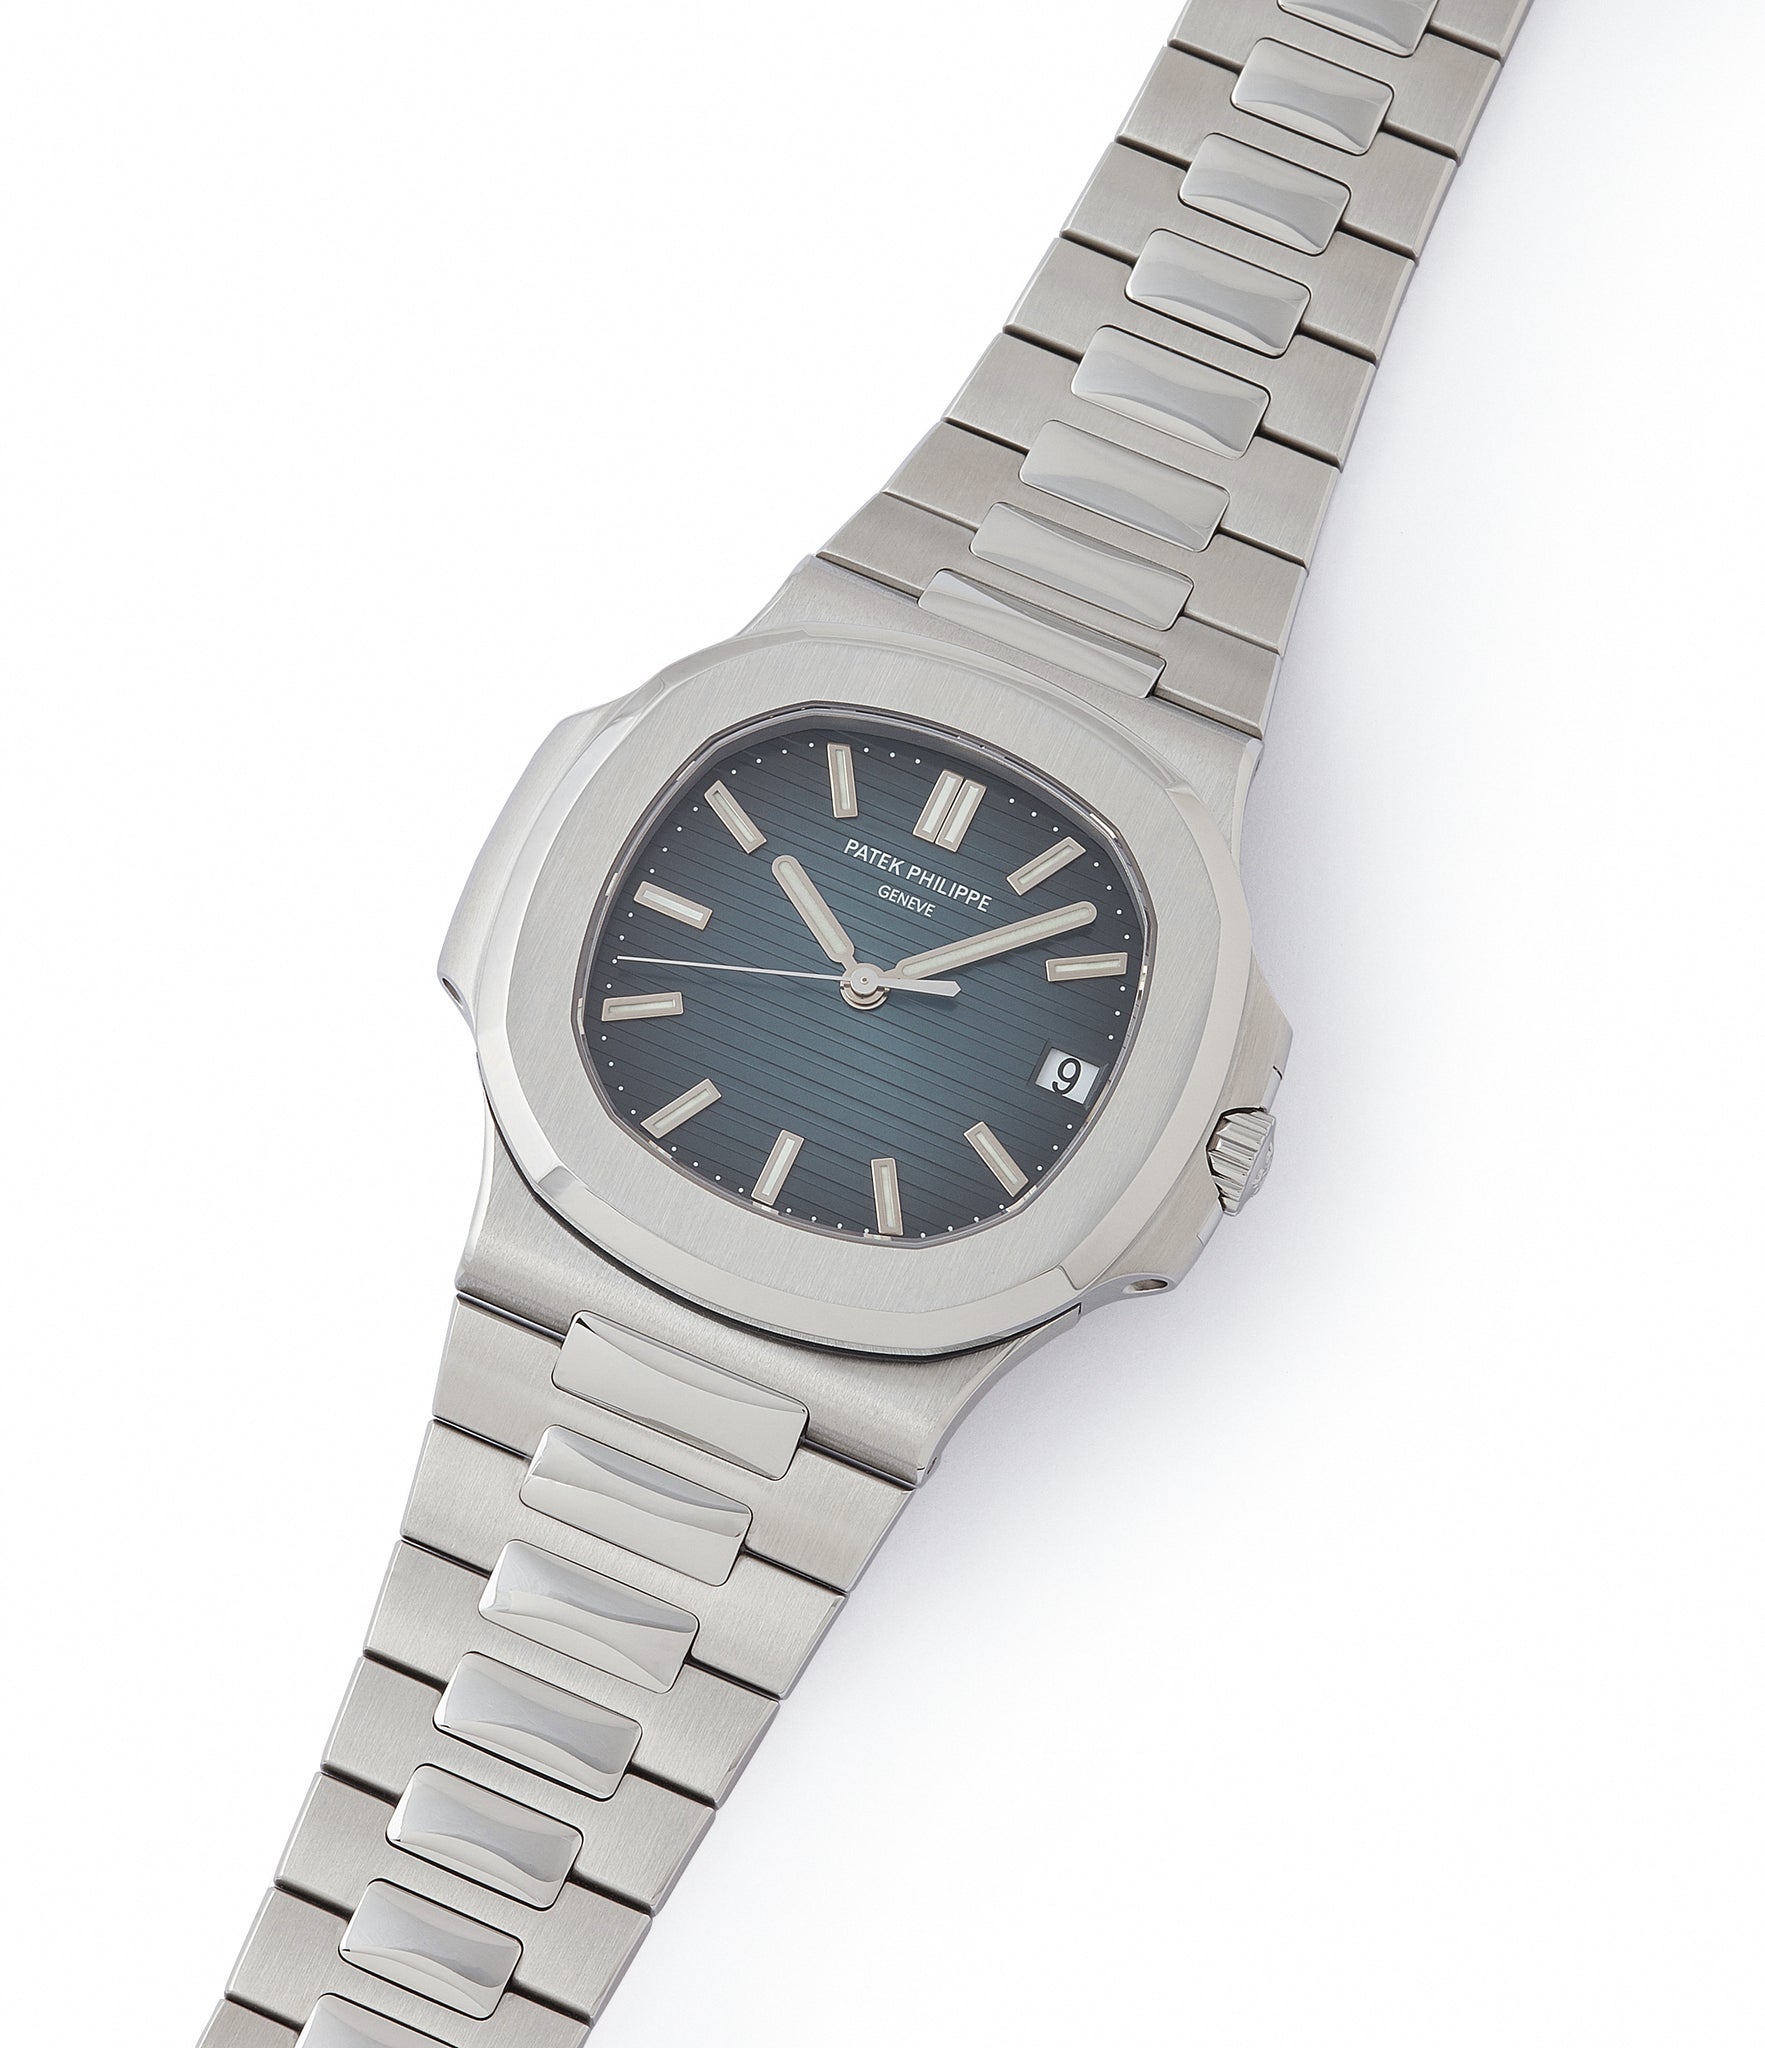 shop Patek Philippe London Jumbo Nautilus 5711/1A-001 steel pre-owned sport watch for sale online at A Collected Man London UK specialist of rare watches